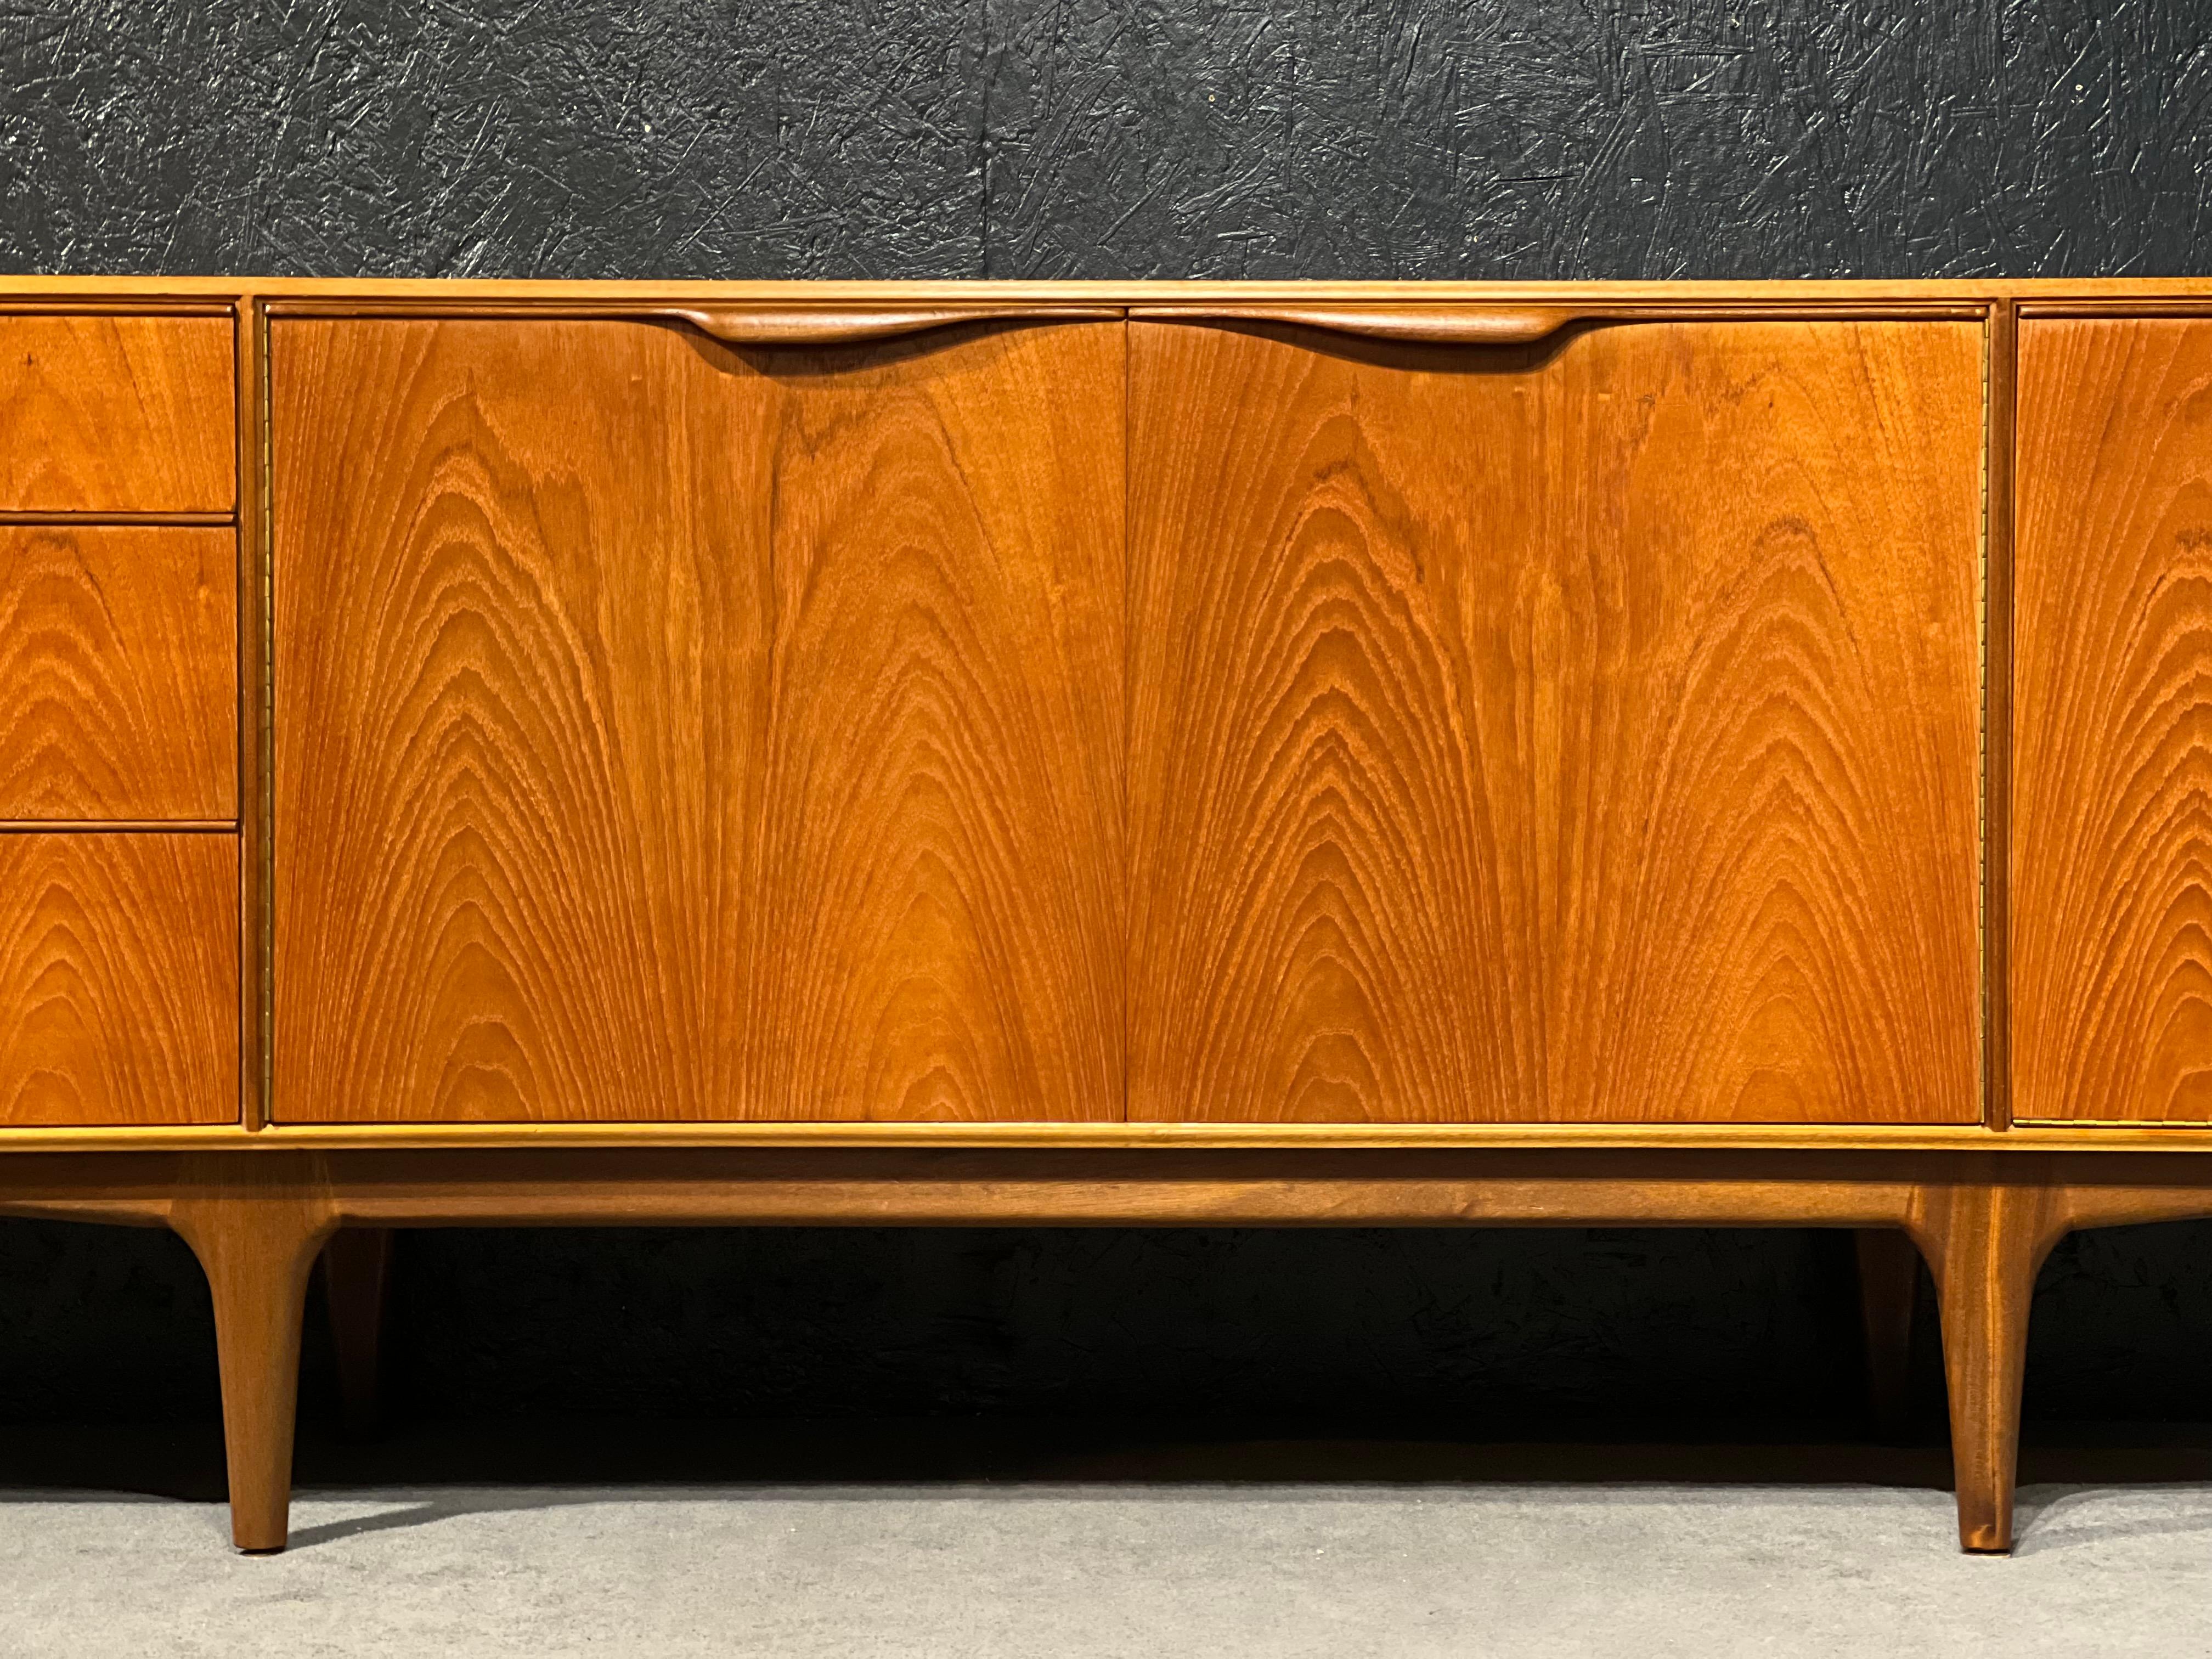 This is a stunning and iconic designs by Tom Robertson for A. H McIntosh Kirkcaldy. This sideboard is well proportionated and light on its feet, sculpted handles add an organic shape to this streamlined design. The cupboard and drawers gave you